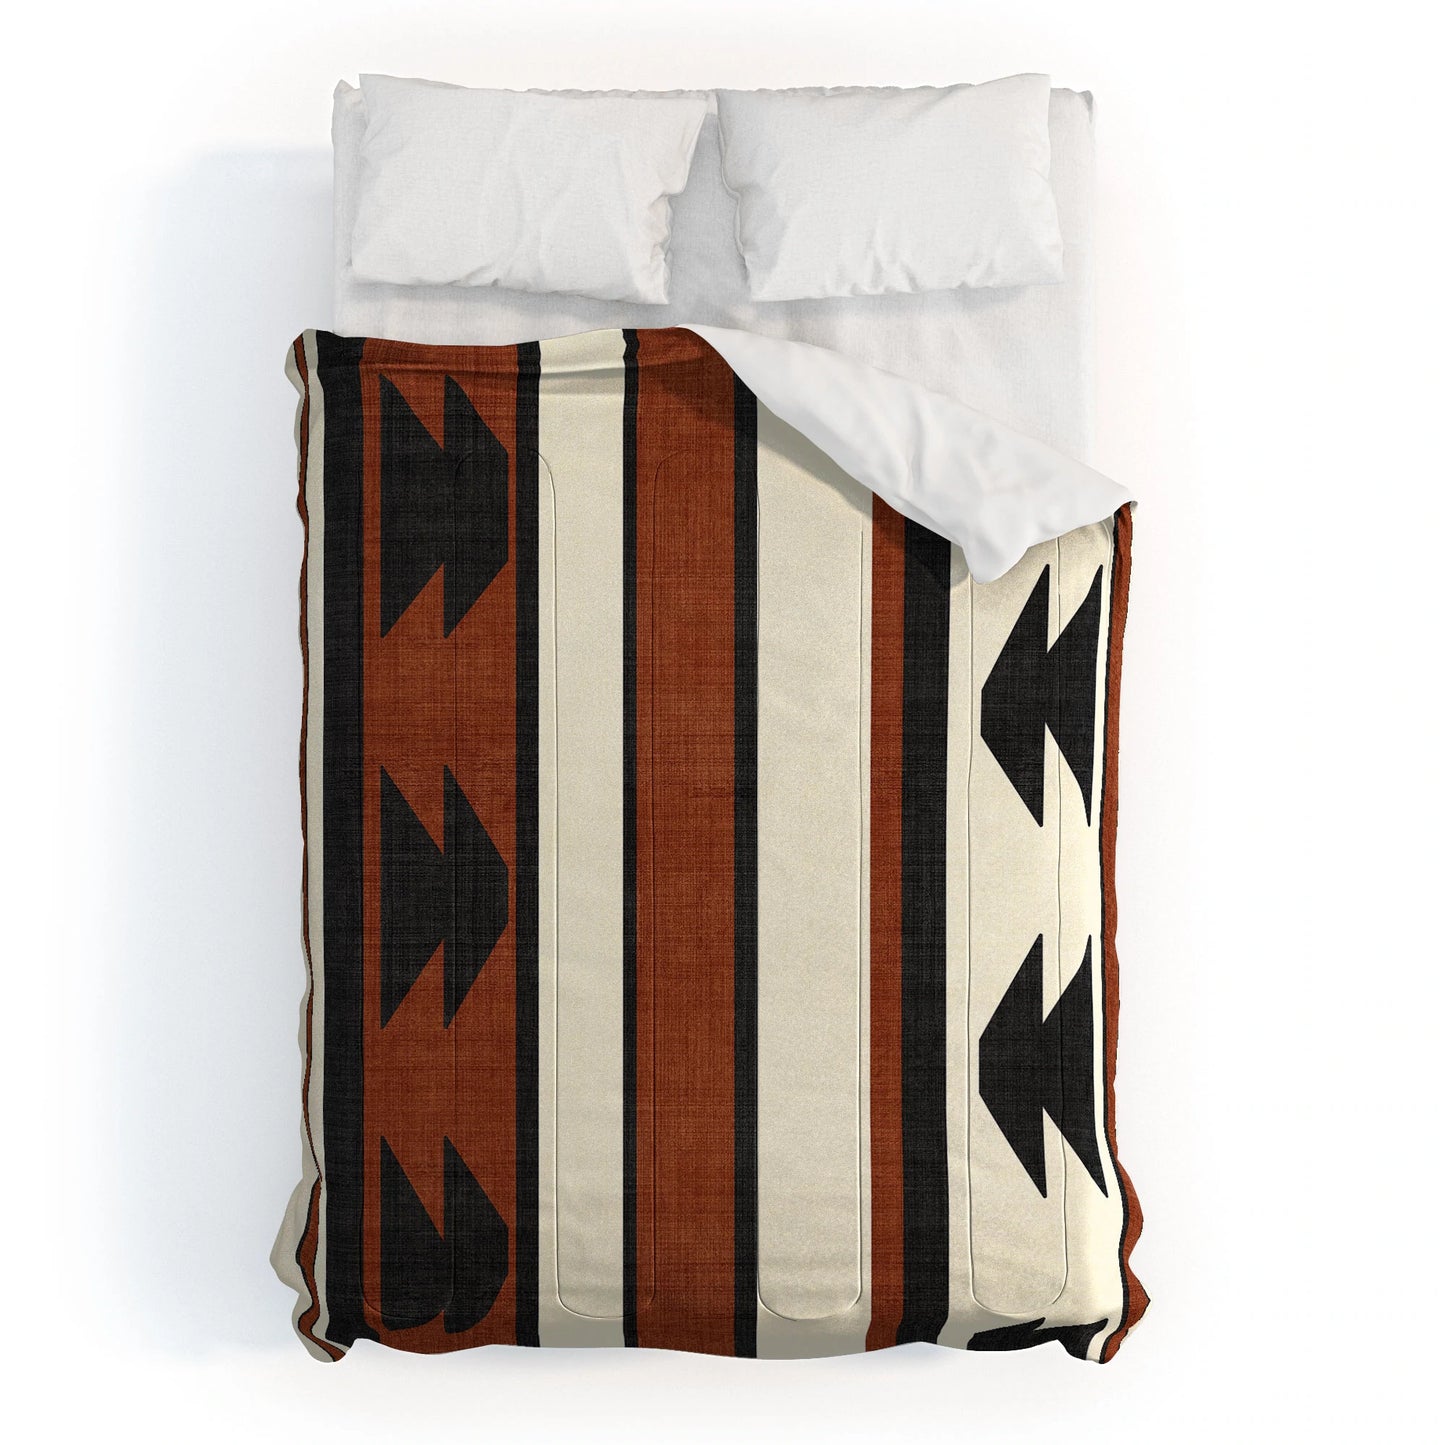 Rustic Aztec Comforter - bedding, blanket, comforter, comforters, cow, cowgirl, cowgirl style, cowgirlbling, cowgirls, cowgirlstyle, decor, farm, home, home decor, homedecor, ranch, rodeo, rustic, south western, southwest, southwestern., southwesternhomedecor, western, western bedding, western home decor, westernbedding, westerndecor, westernhomedecor -  - Baha Ranch Western Wear